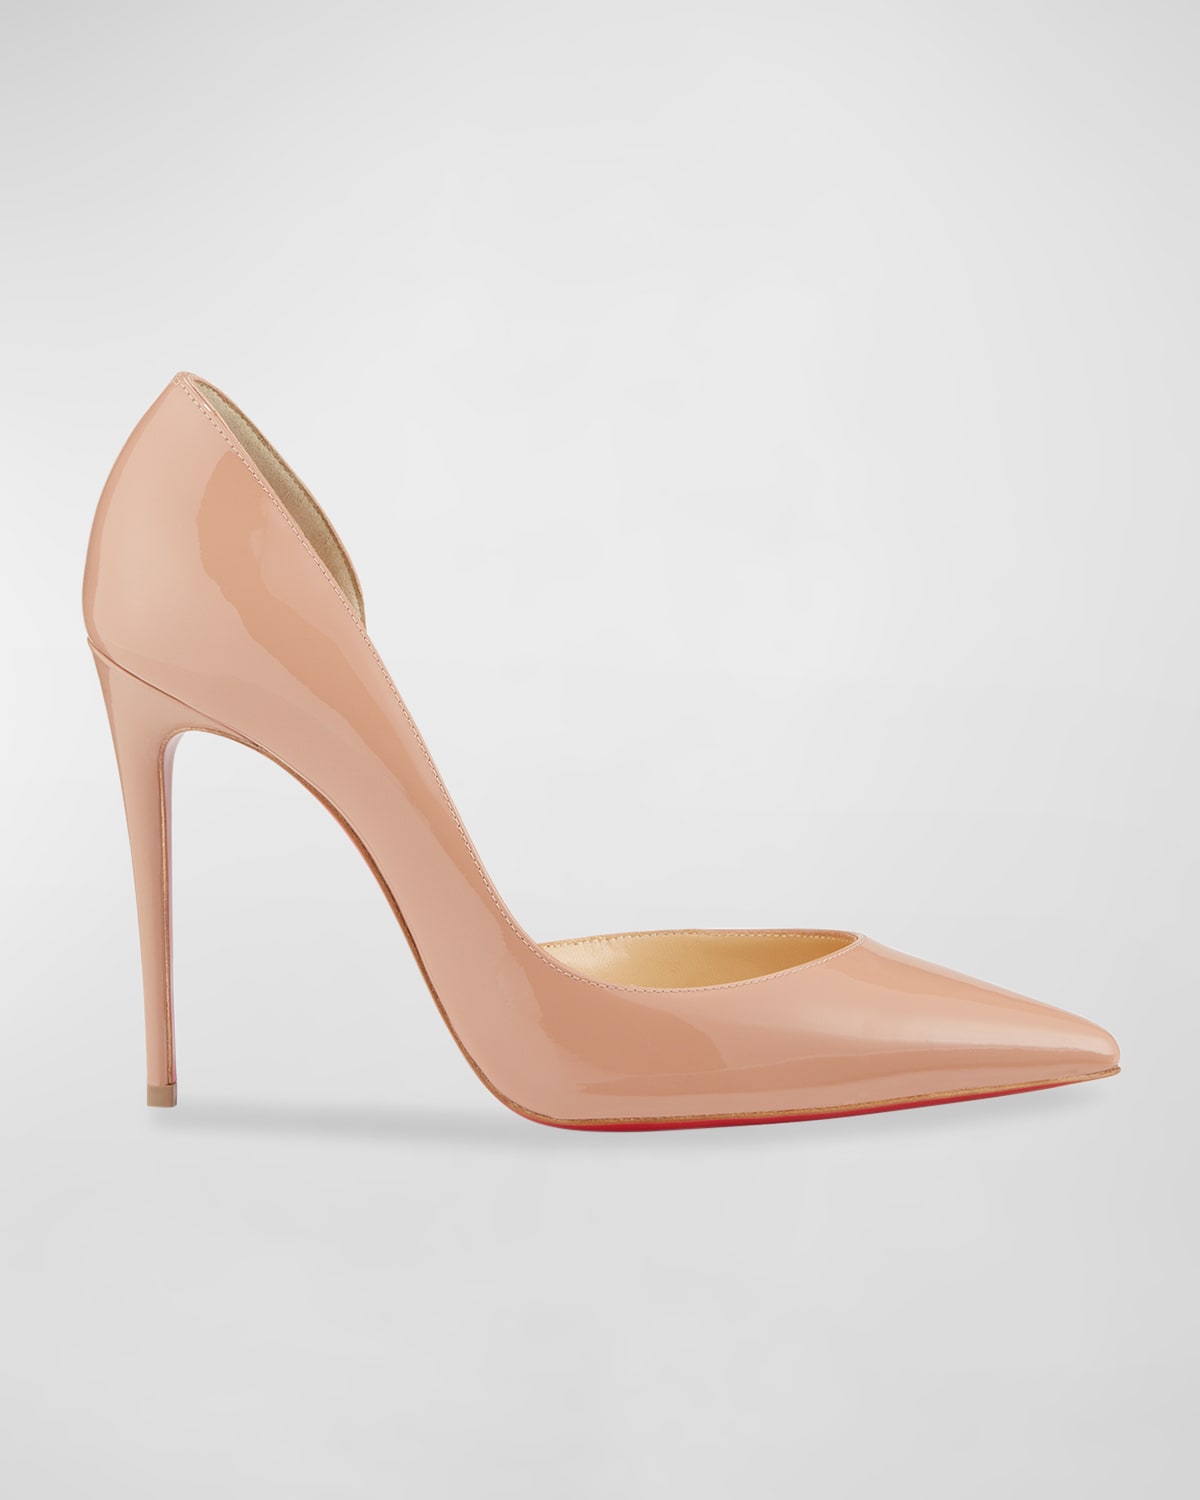 Christian Louboutin Iriza Patent 100mm Half-d'orsay Red Sole High-heel Pumps In Blush